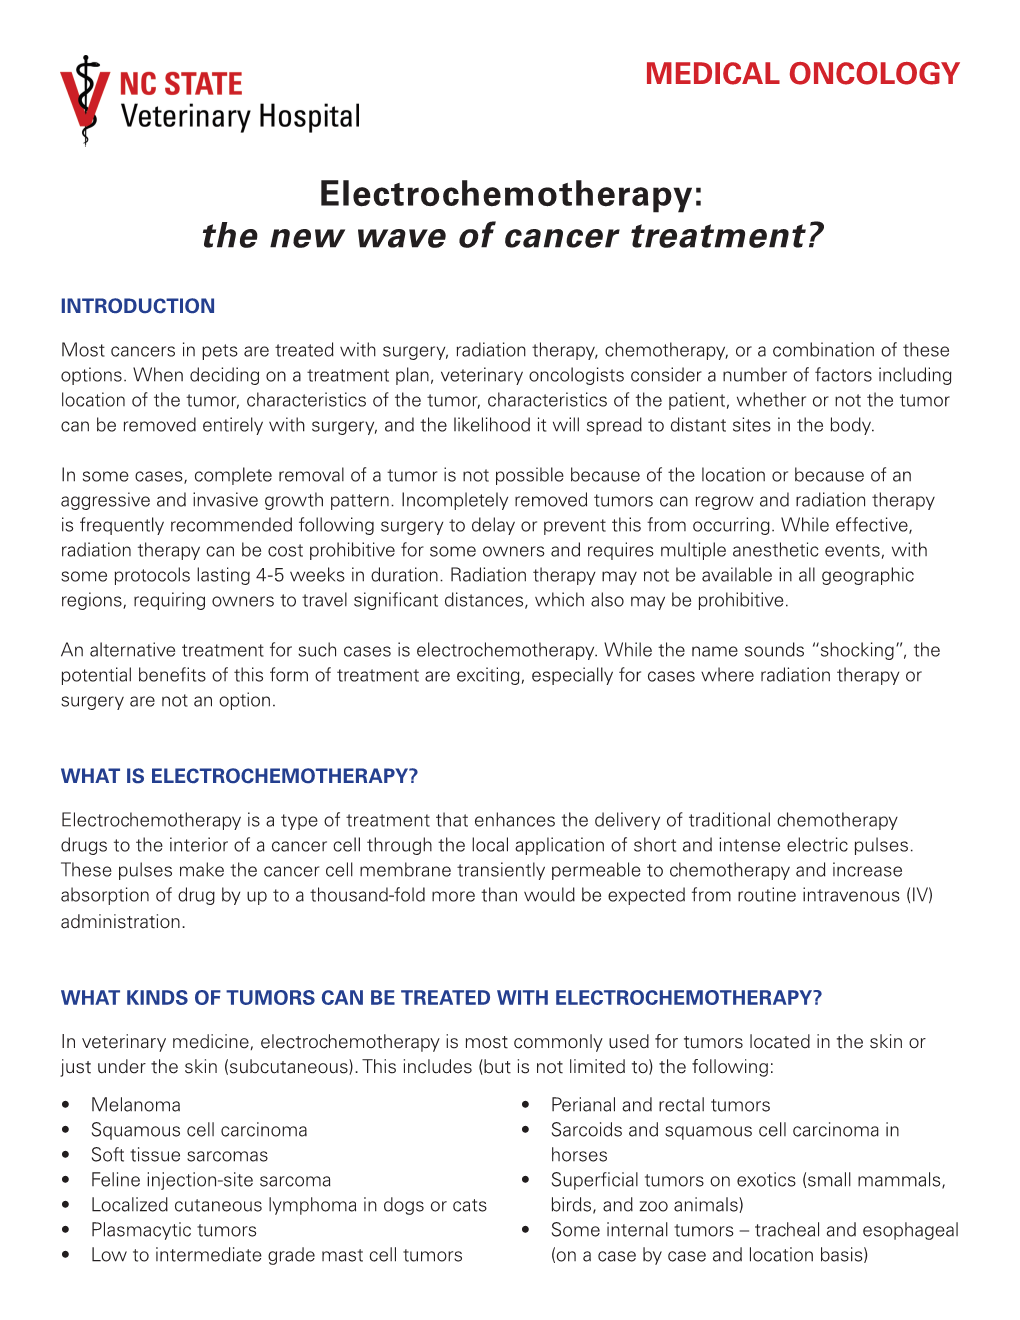 Electrochemotherapy: the New Wave of Cancer Treatment?